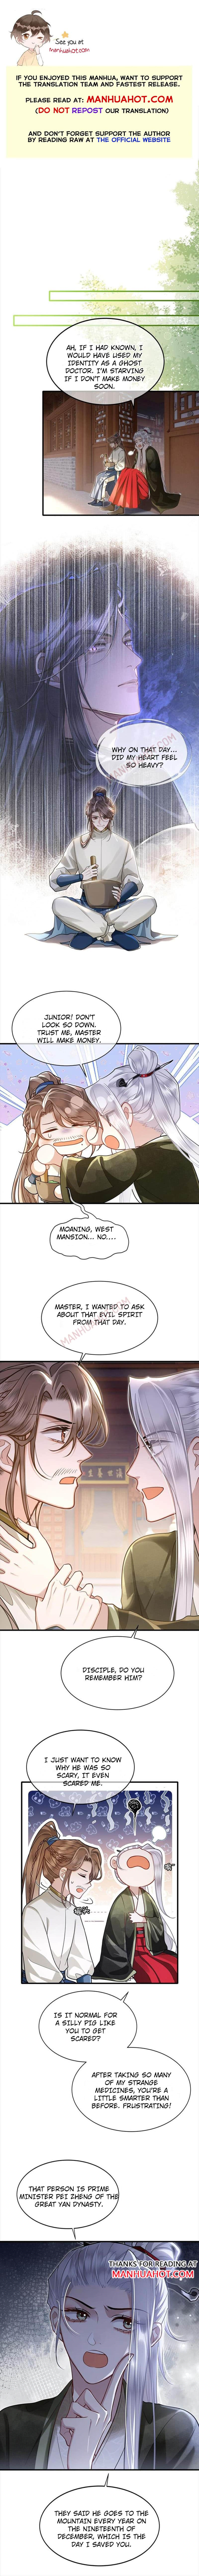 His Highness's Allure - Page 2